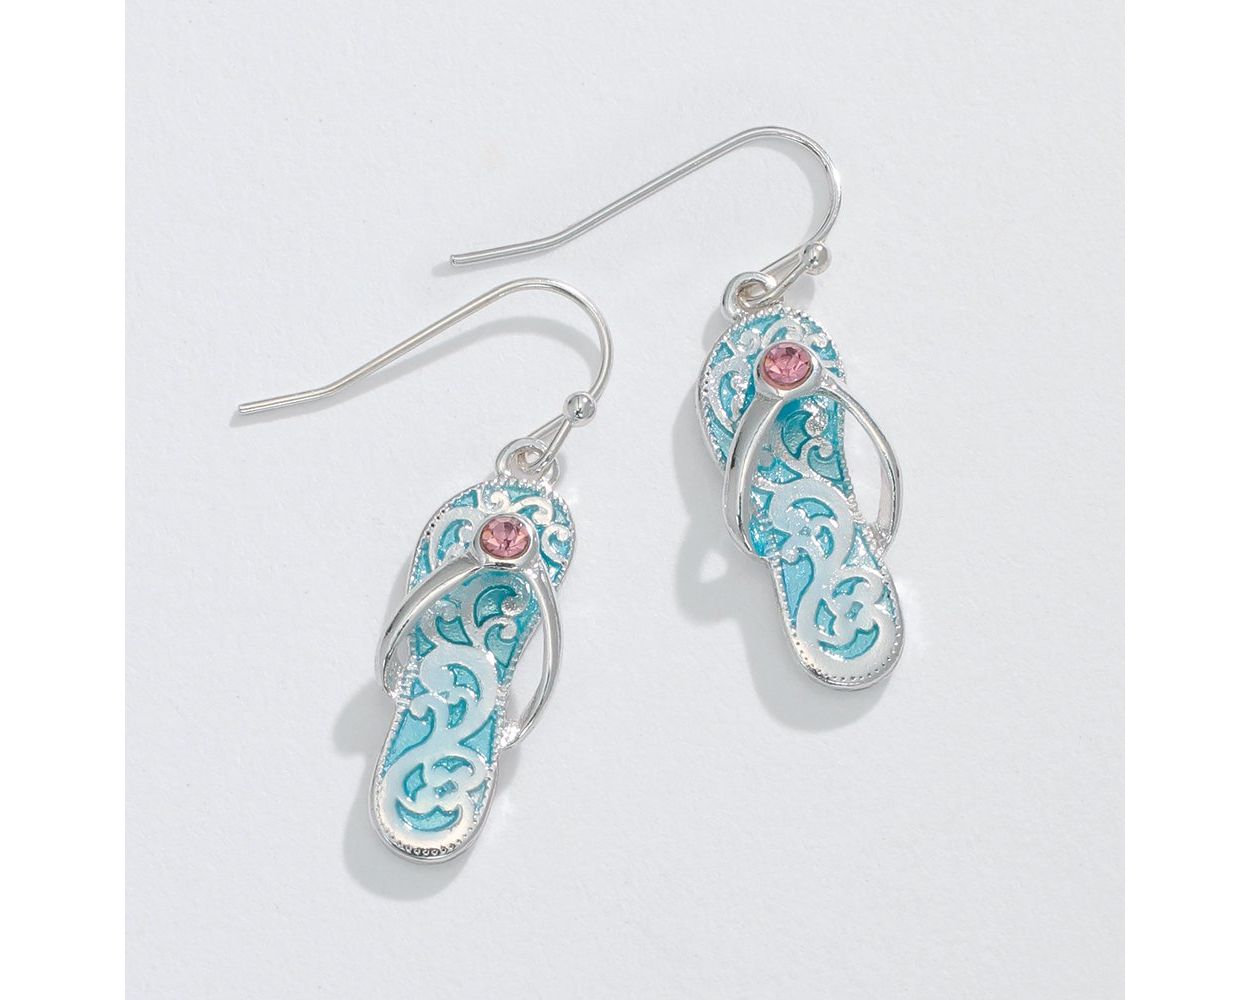 Aqua Blue With Pink Crystal Flip Flop Earring